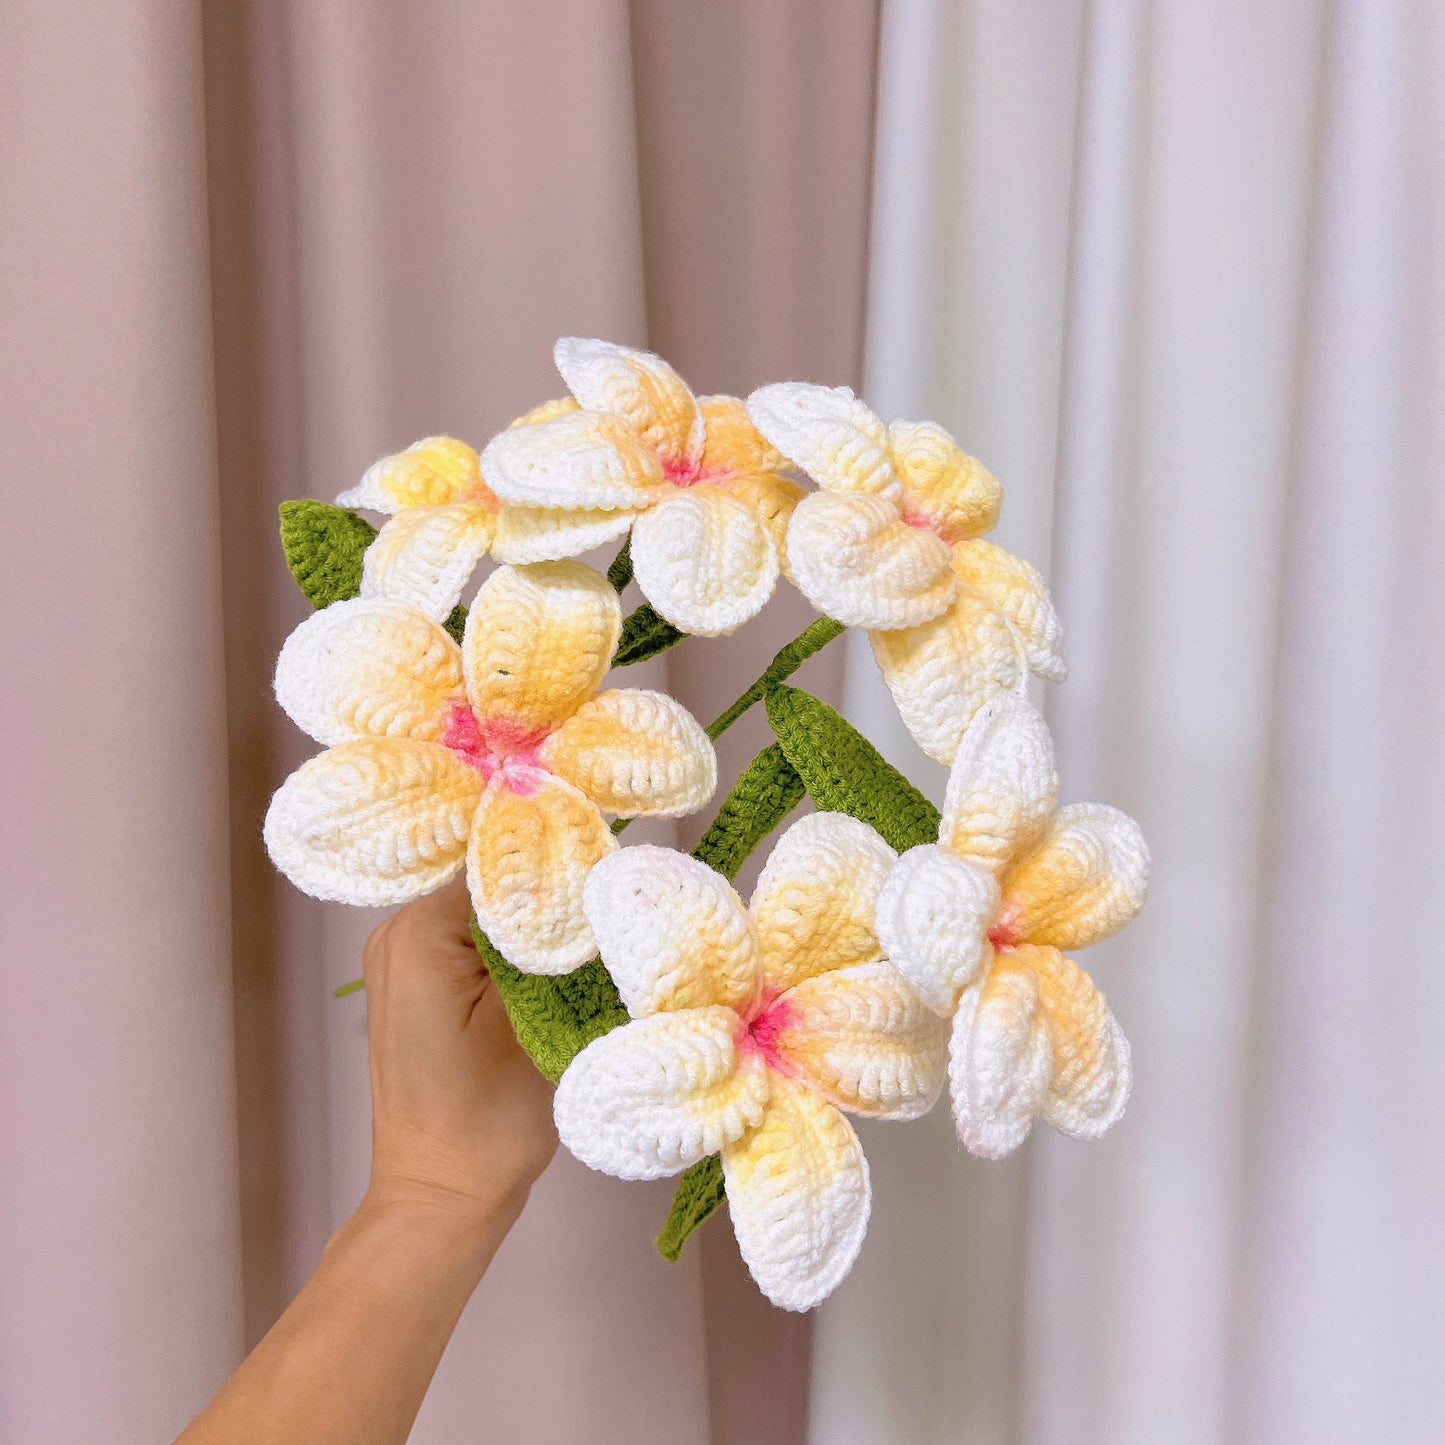 Handcrafted Crochet 12 Frangipani Bouquet with White and Silver Packaging - Yellow Petals with Orange Cores